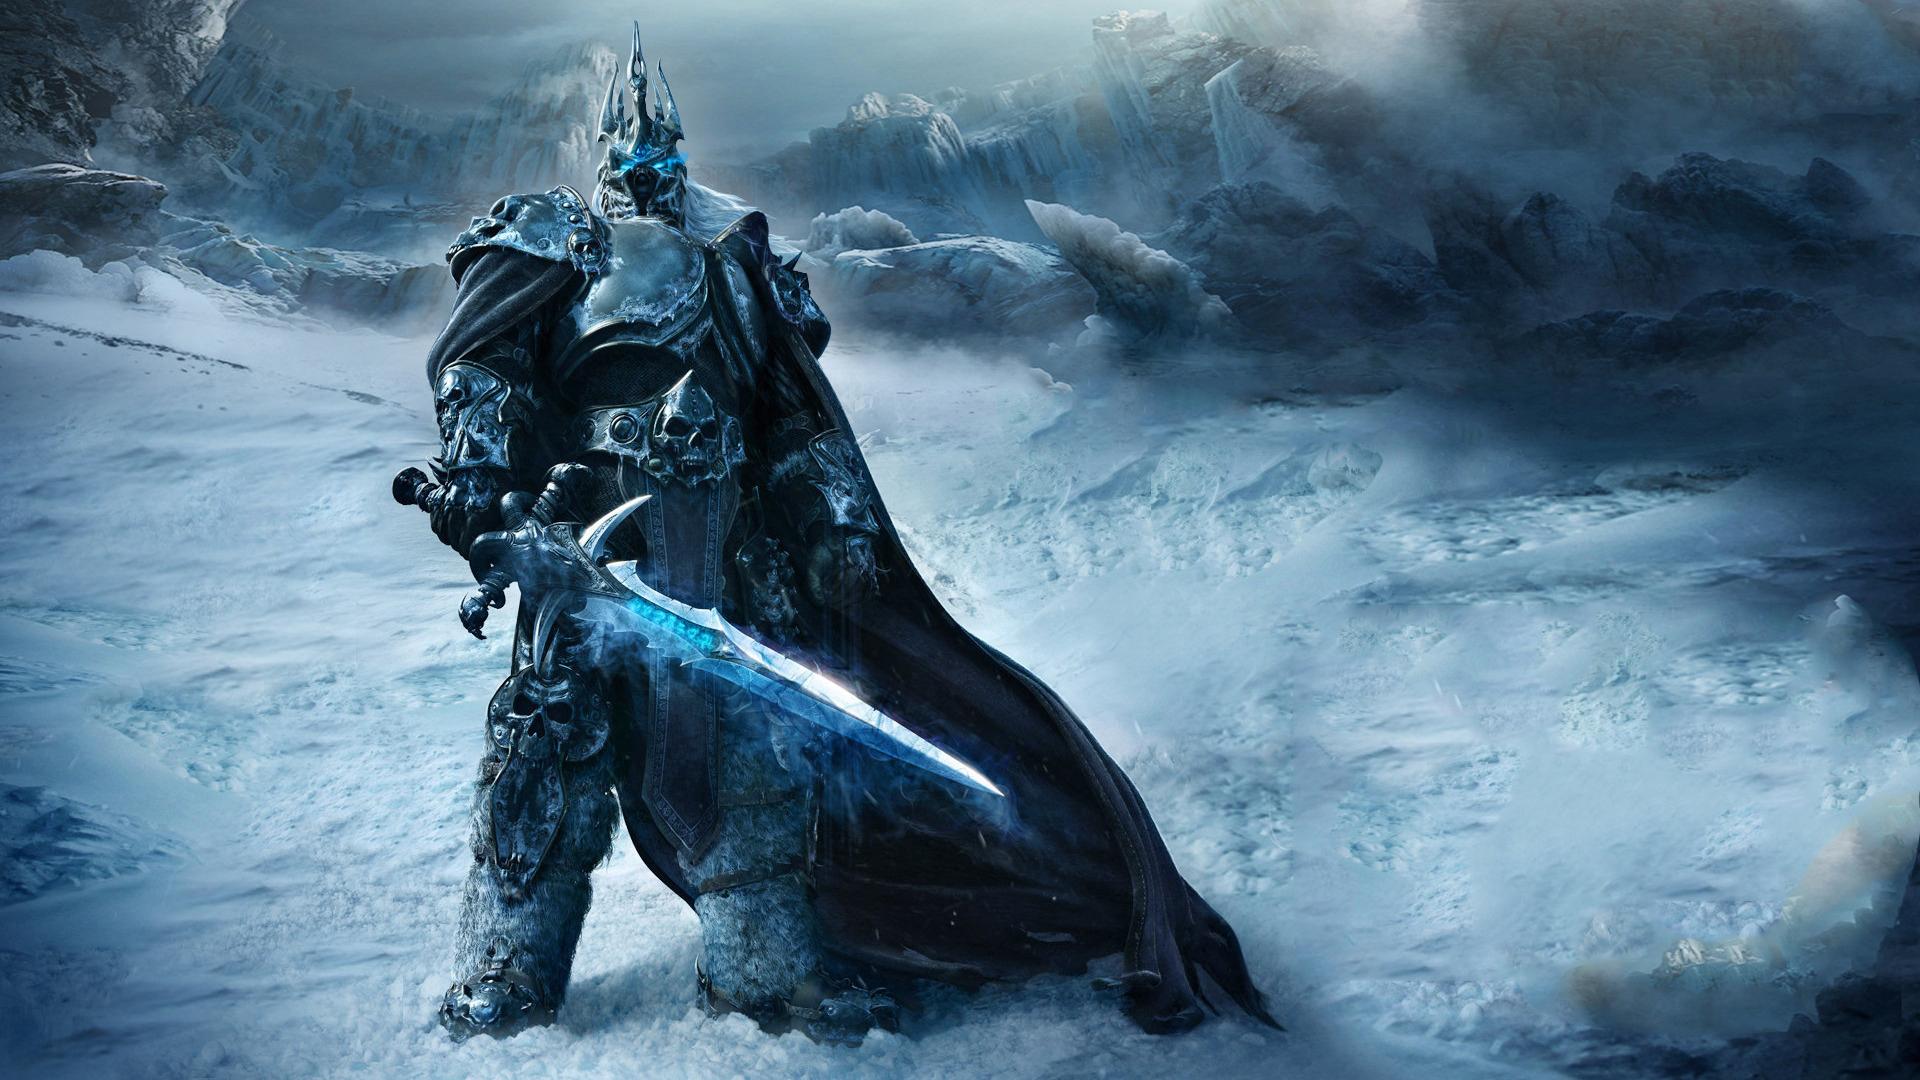 General 1920x1080 World of Warcraft: Wrath of the Lich King World of Warcraft video games Lich King PC gaming sword snow glowing eyes armor video game art cyan 2008 (Year) Blizzard Entertainment